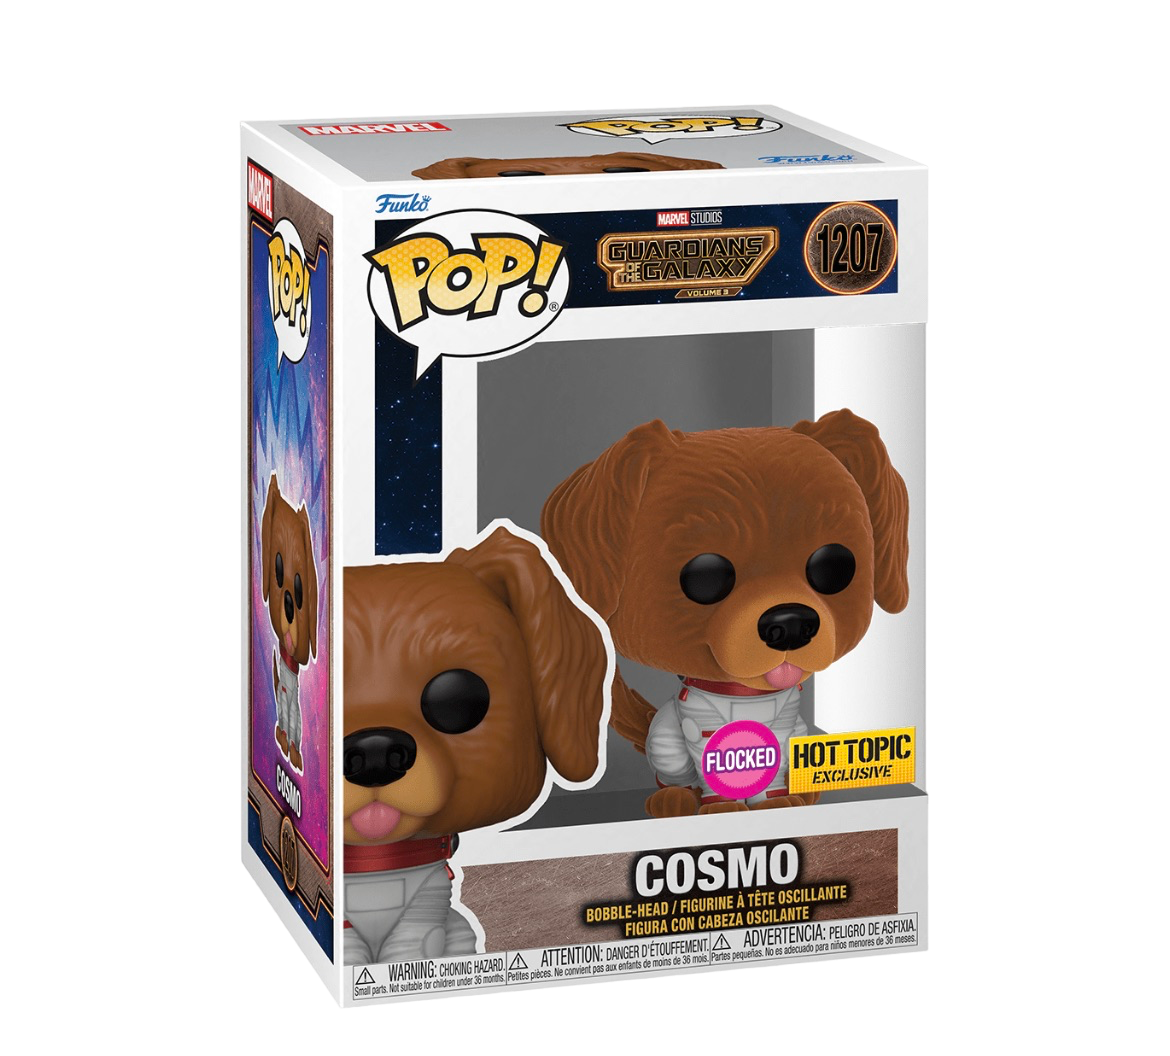 Marvel: Guardians of the Galaxy Vol. 3: Cosmo (Flocked) (Hot Topic Exclusive)